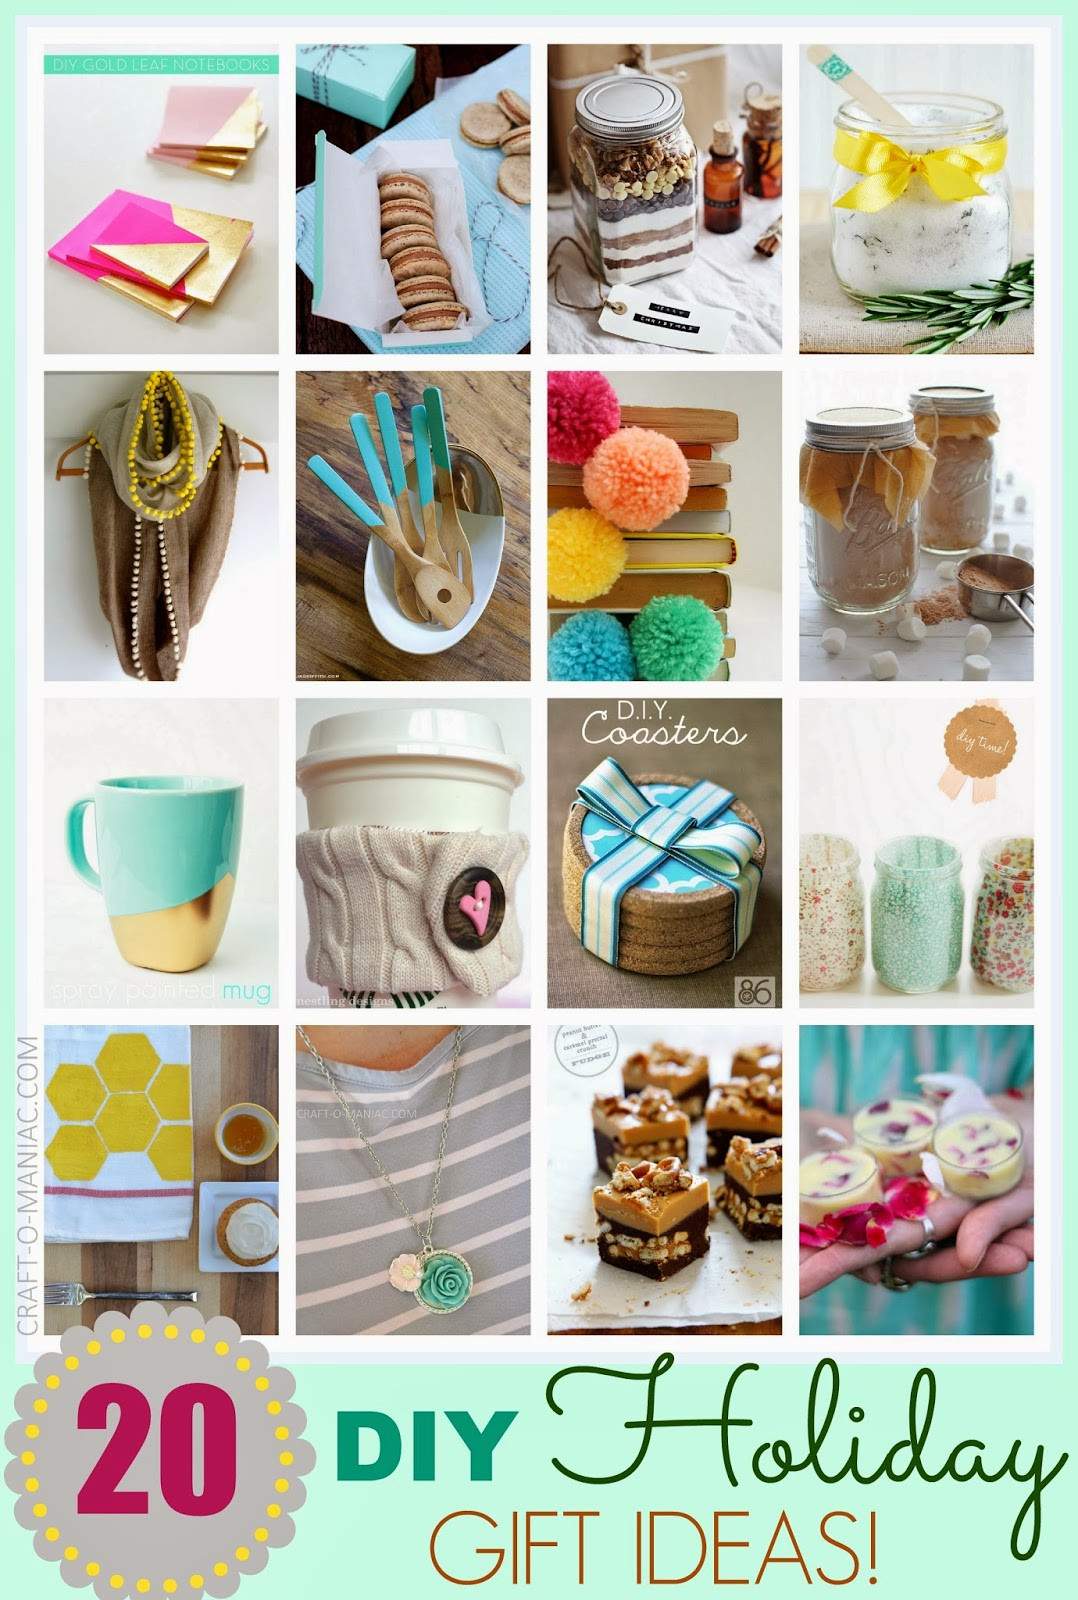 Holiday Gift Crafts Ideas
 Top 20 DIY Holiday Gift Ideas